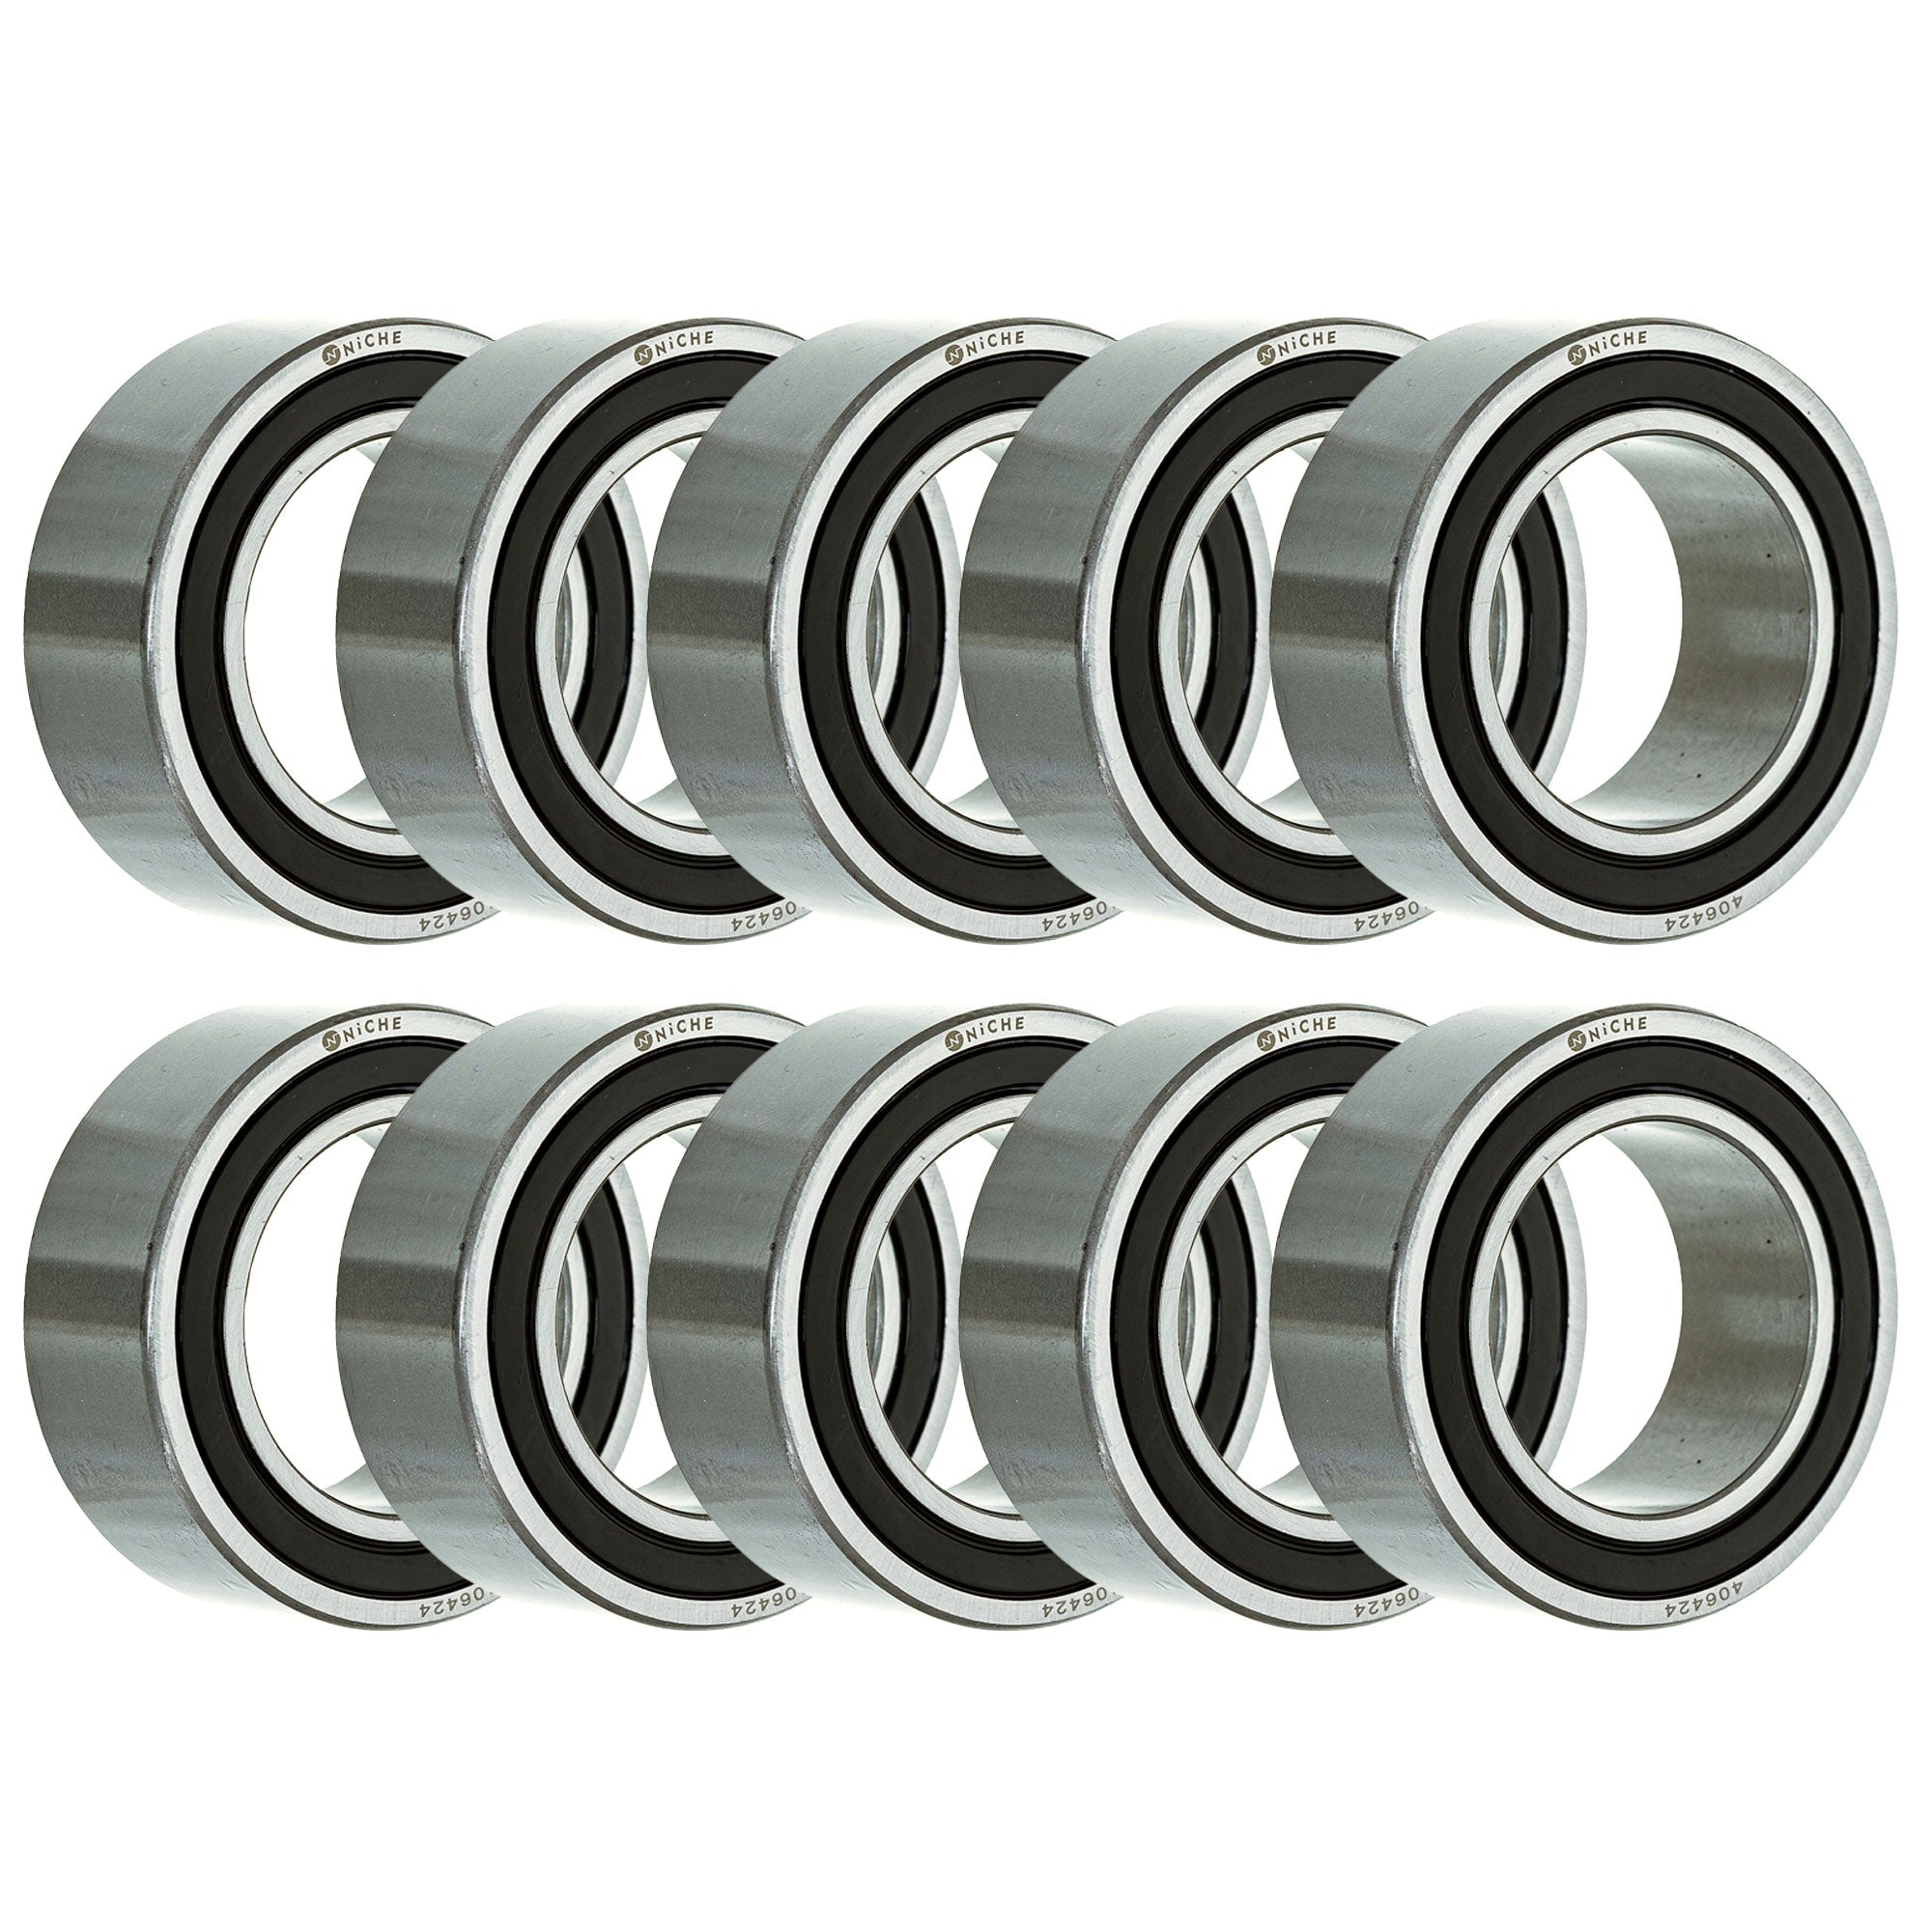 Single Row, Deep Groove, Ball Bearing Pack of 10 10-Pack for zOTHER YFZ450XSE YFZ450X NICHE 519-CBB2205R